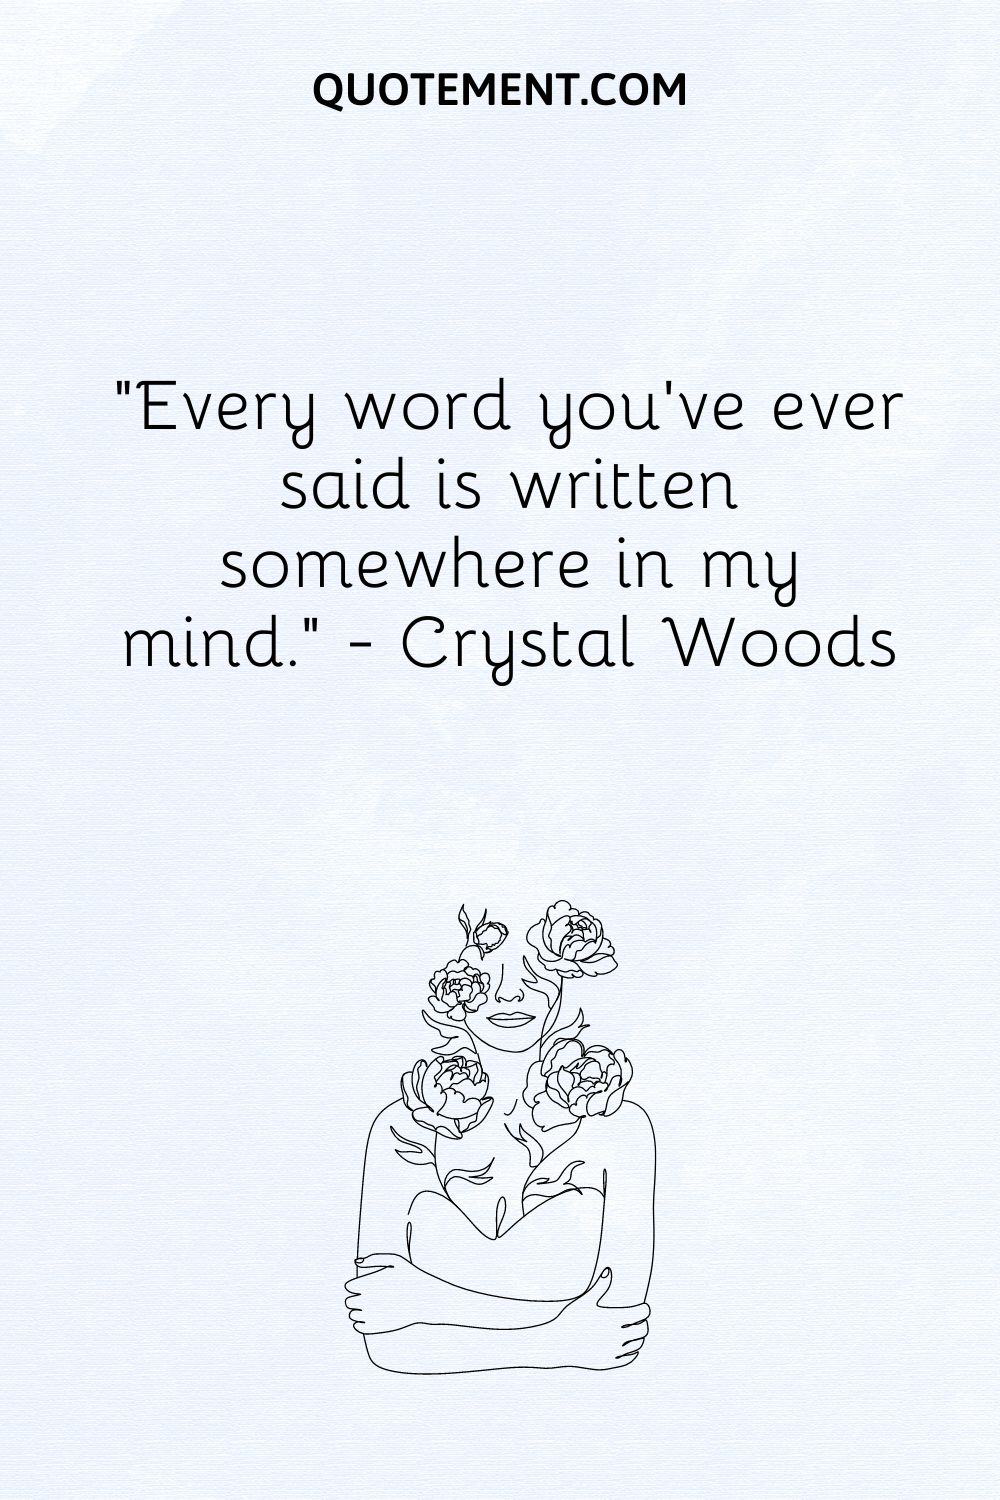 Every word you’ve ever said is written somewhere in my mind